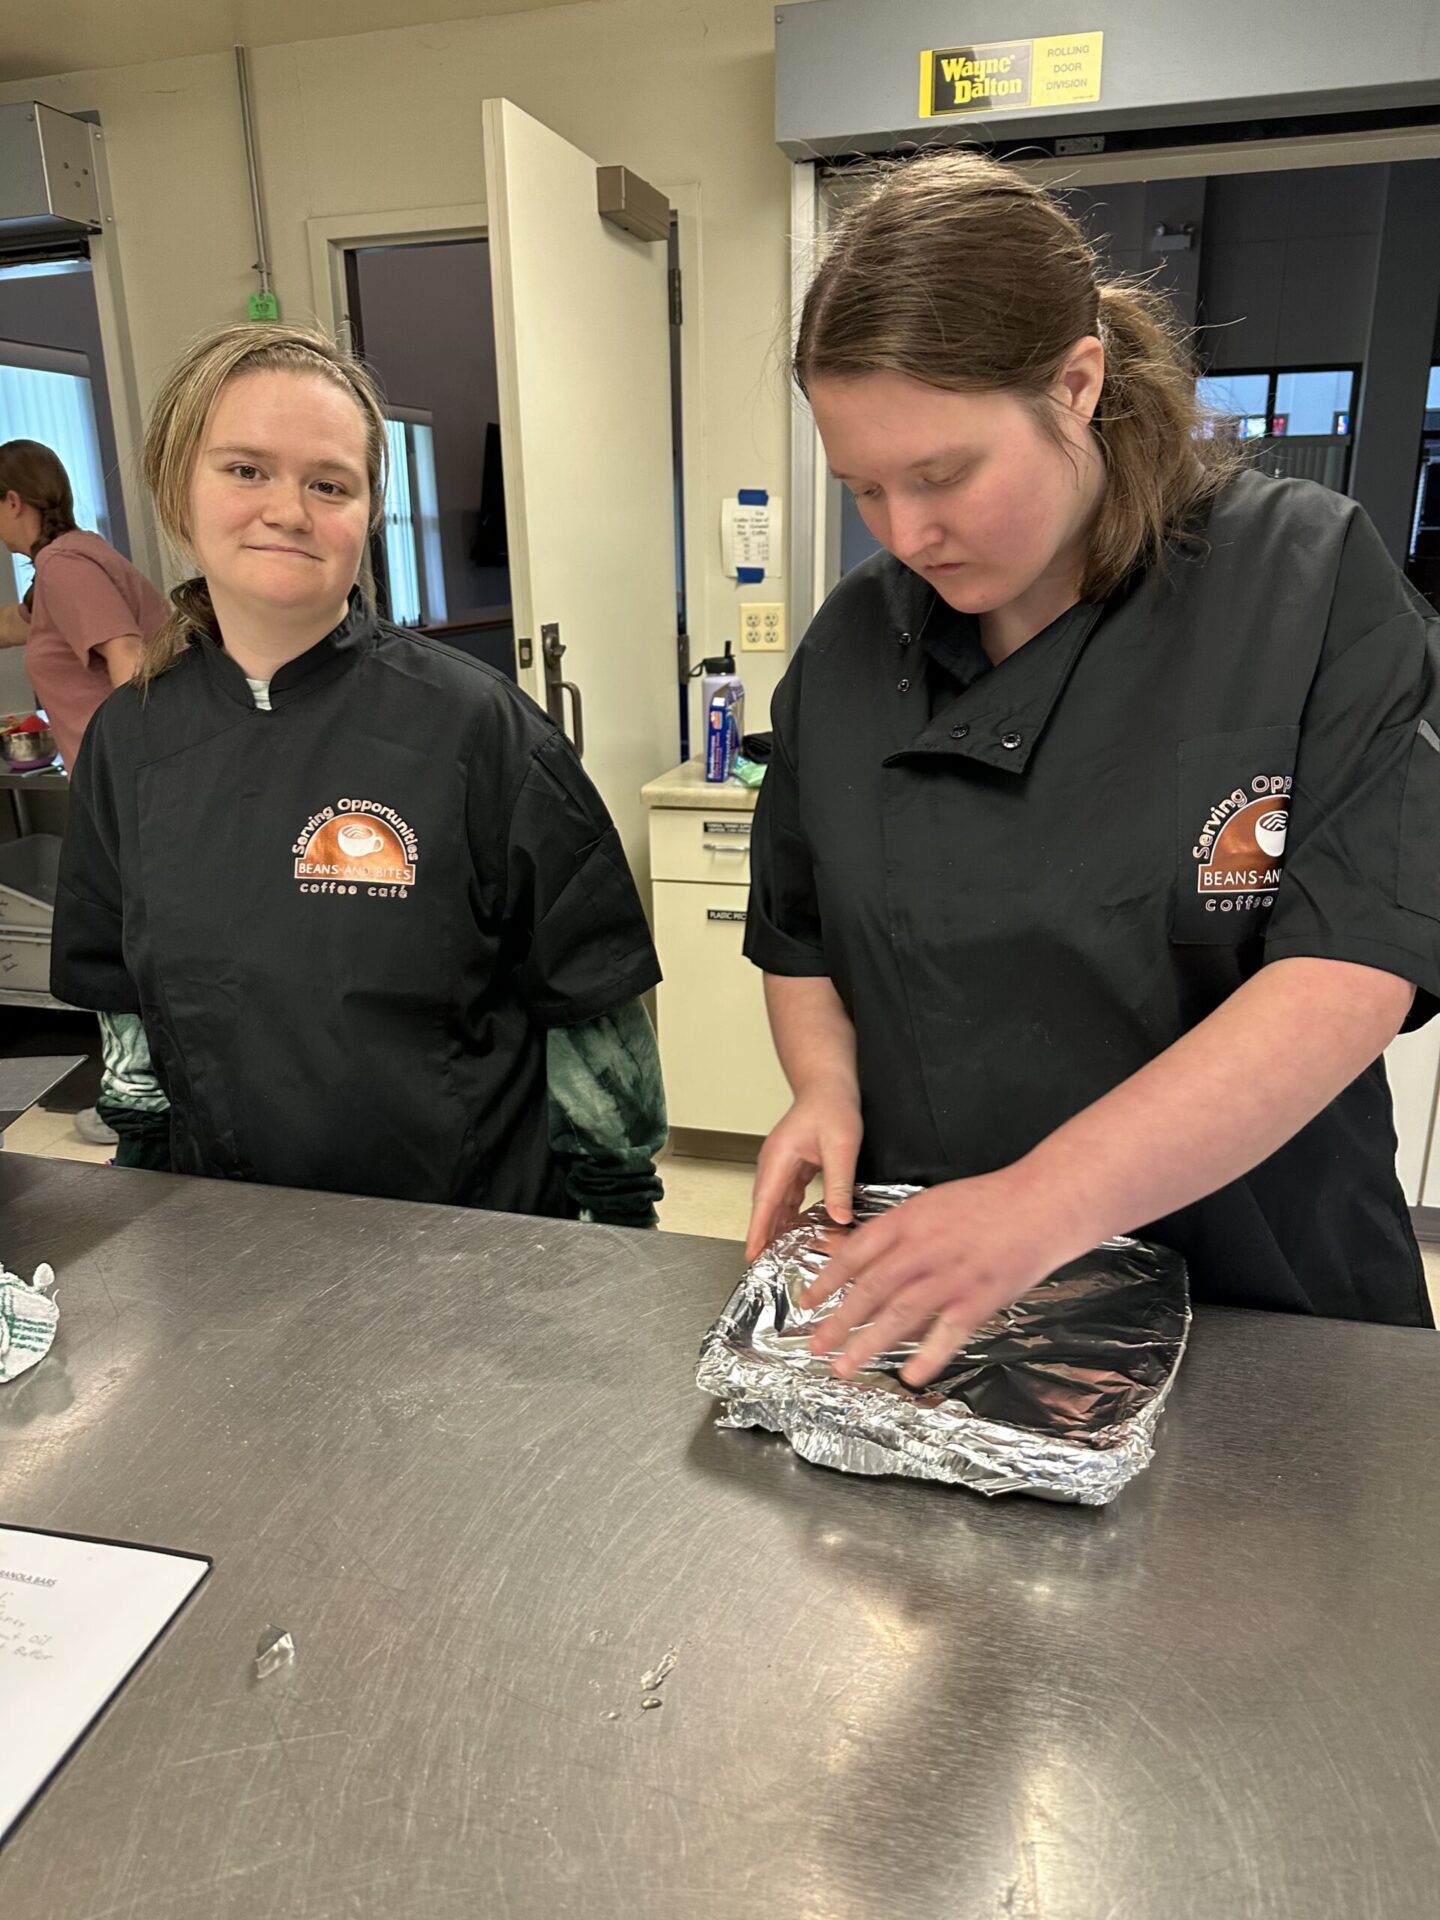 Two people in black chef jackets stand at a stainless steel counter in a kitchen. One person is smiling at the camera, while the other is focused on wrapping a tray with aluminum foil.